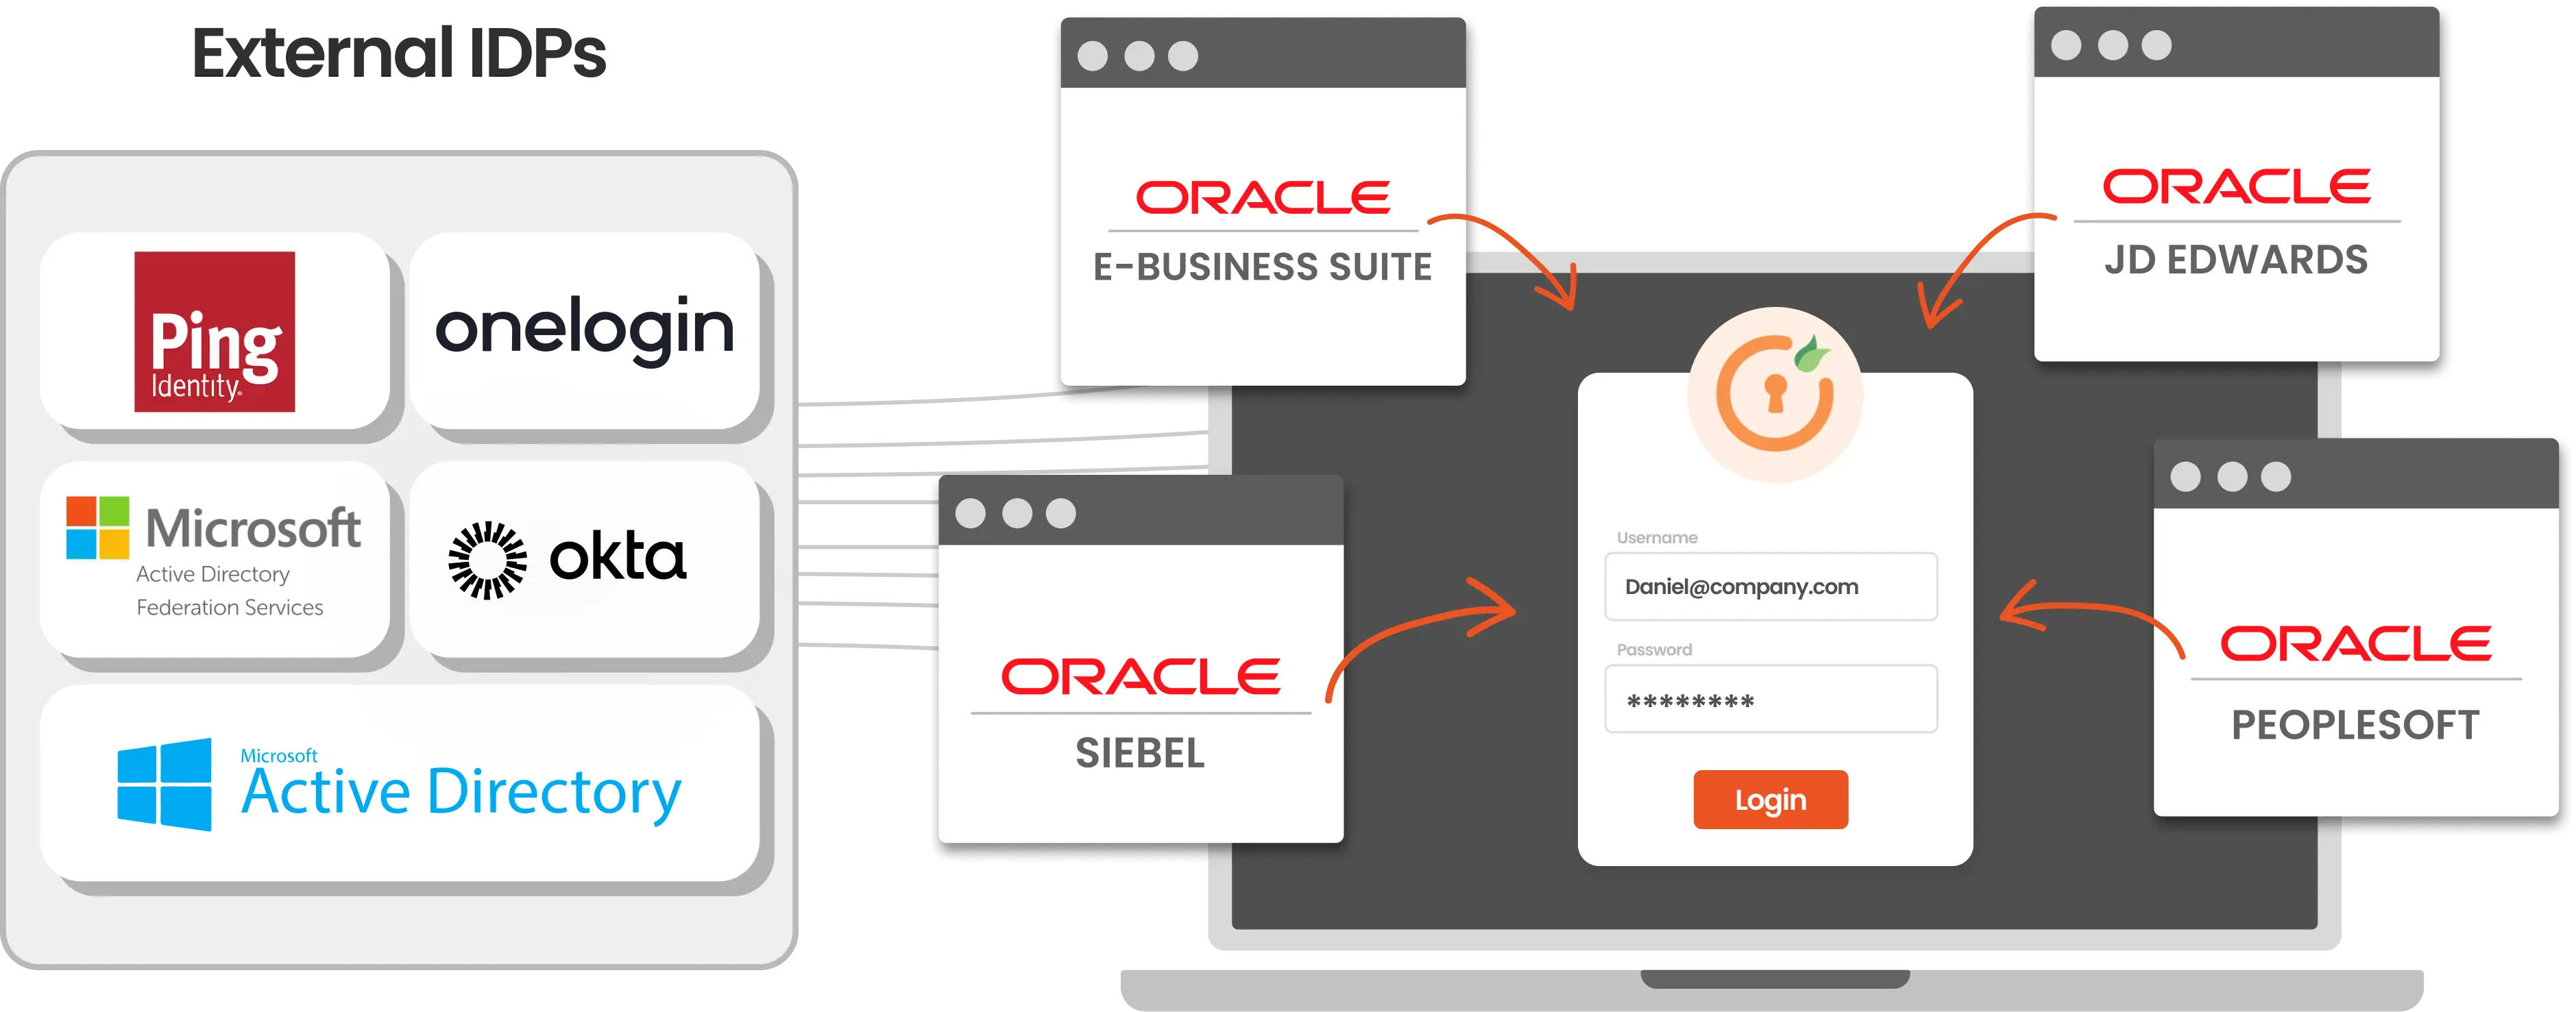 Oracle SSO Authentication Solution